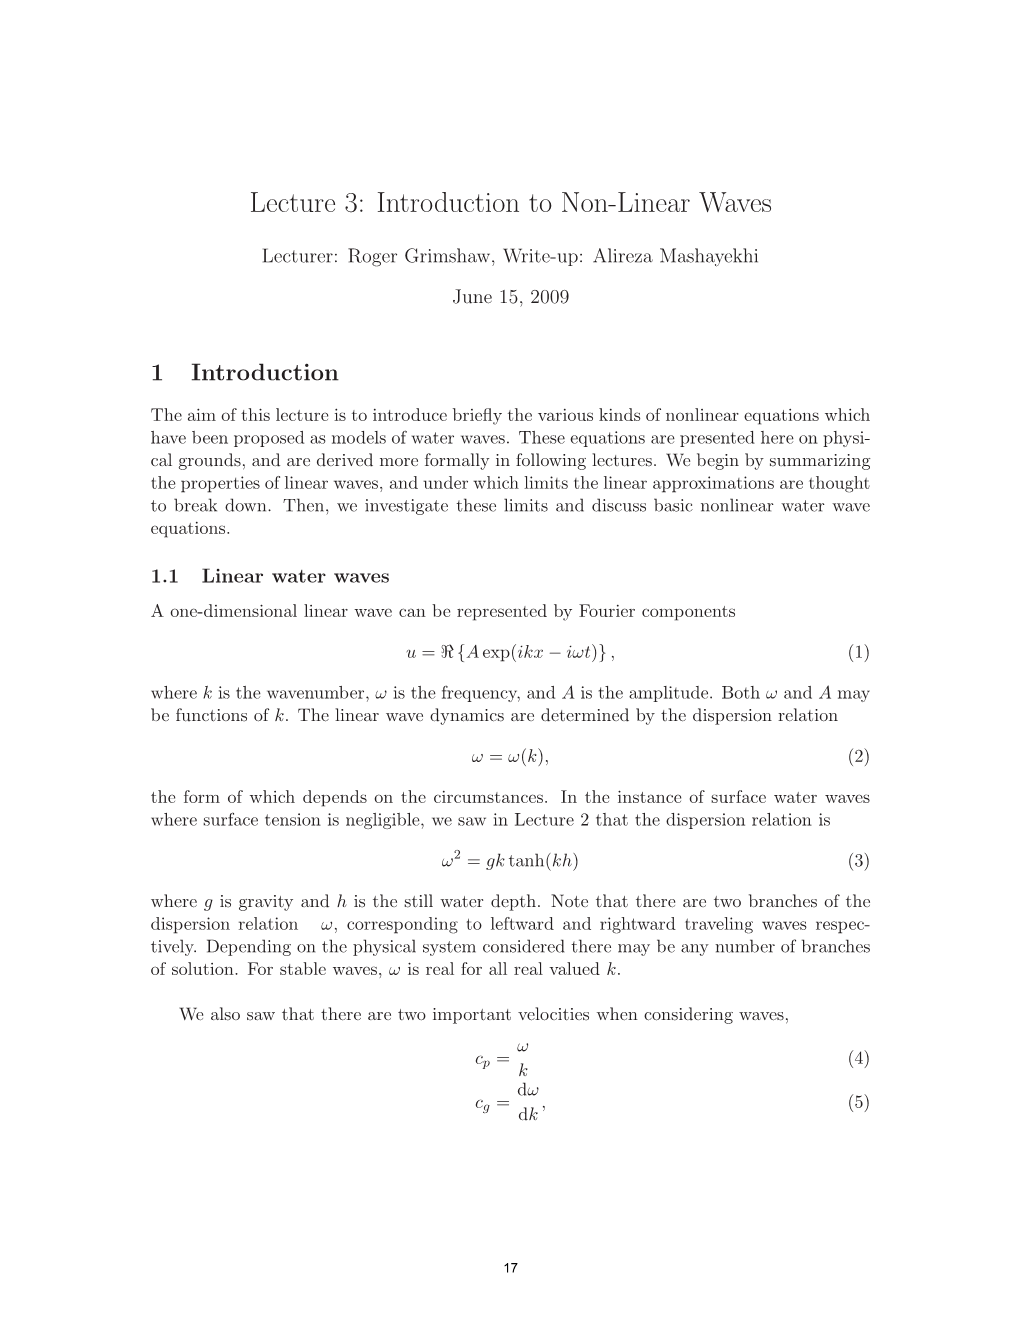 Introduction to Non-Linear Waves